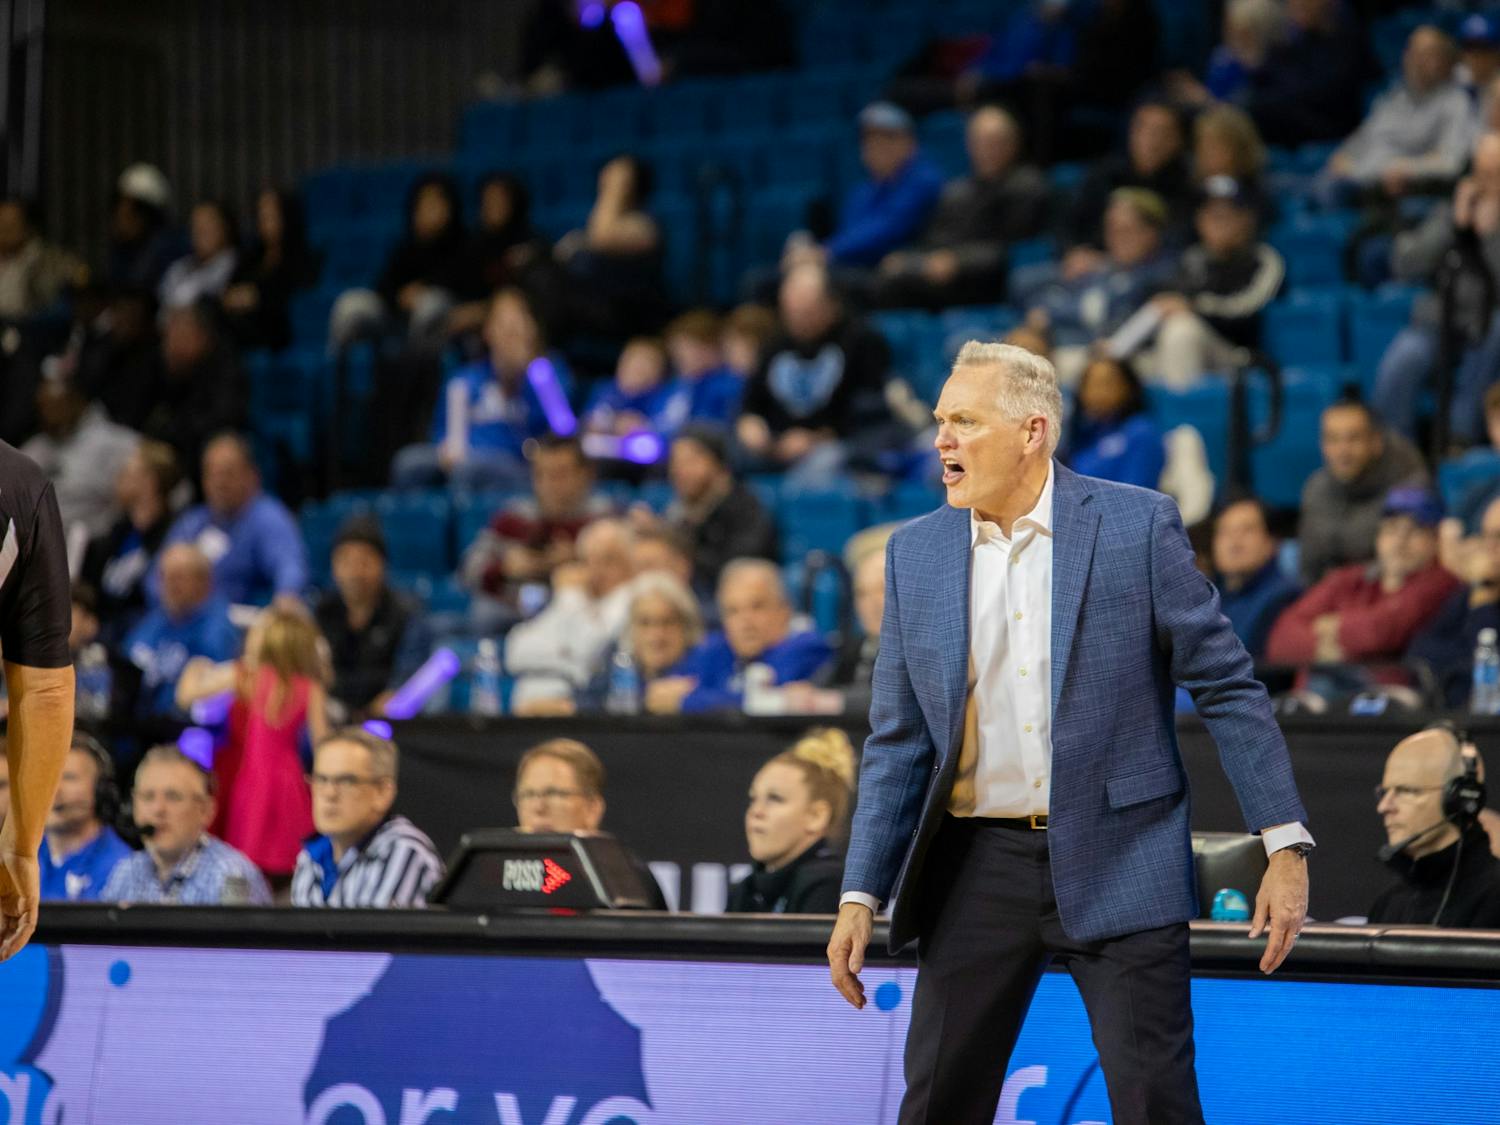 UB has begun a national search to find its next men's basketball coach after Jim Whitesell was fired Saturday.